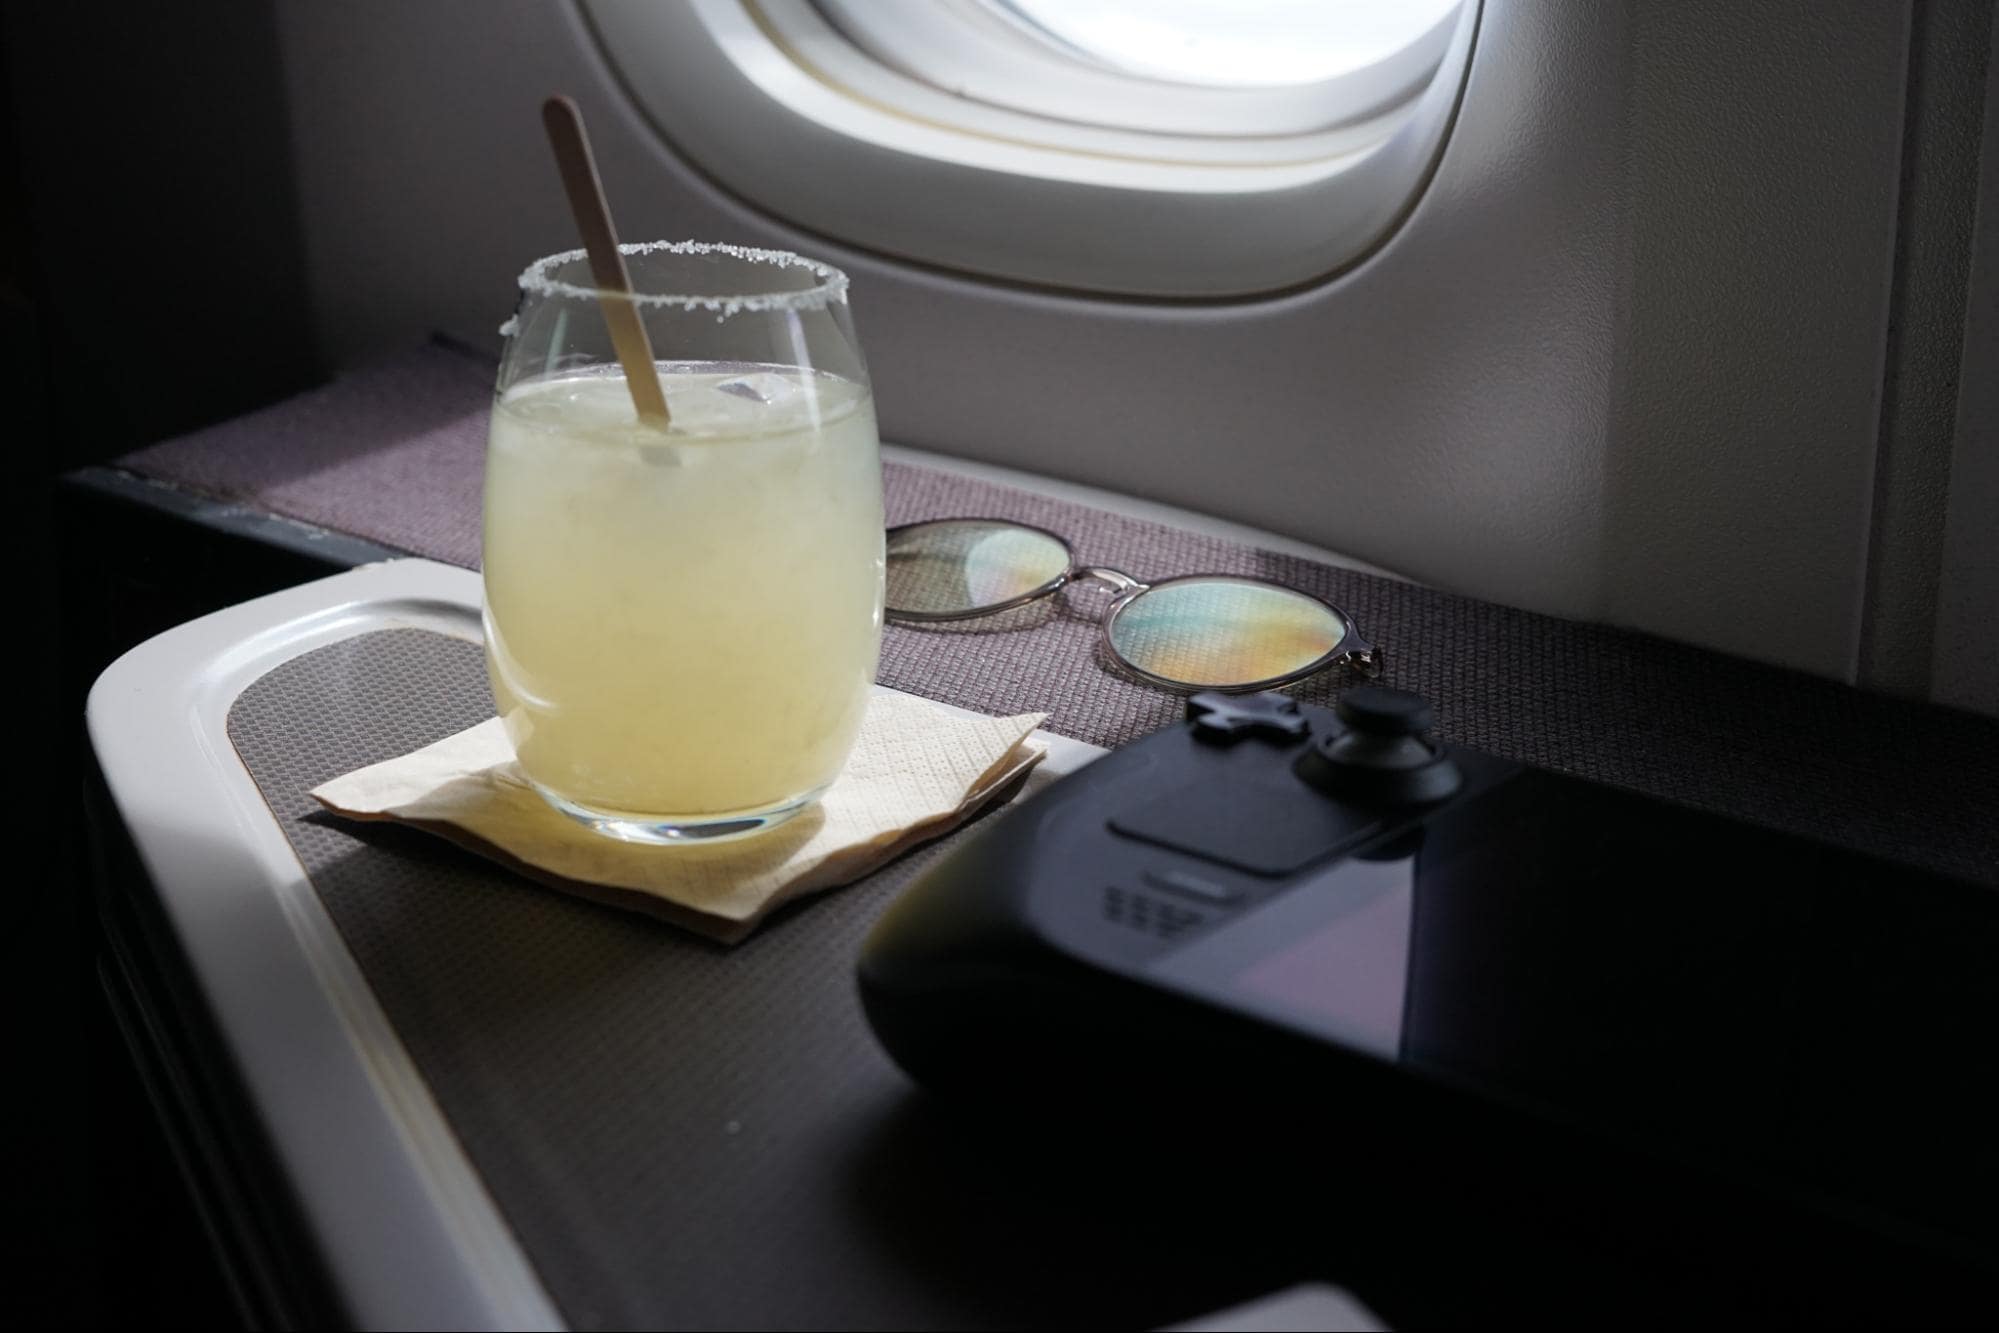 A refreshing beverage on an airplane tray table beside a pair of sunglasses and a handheld gaming device Steam Deck, capturing a moment of relaxation during a flight